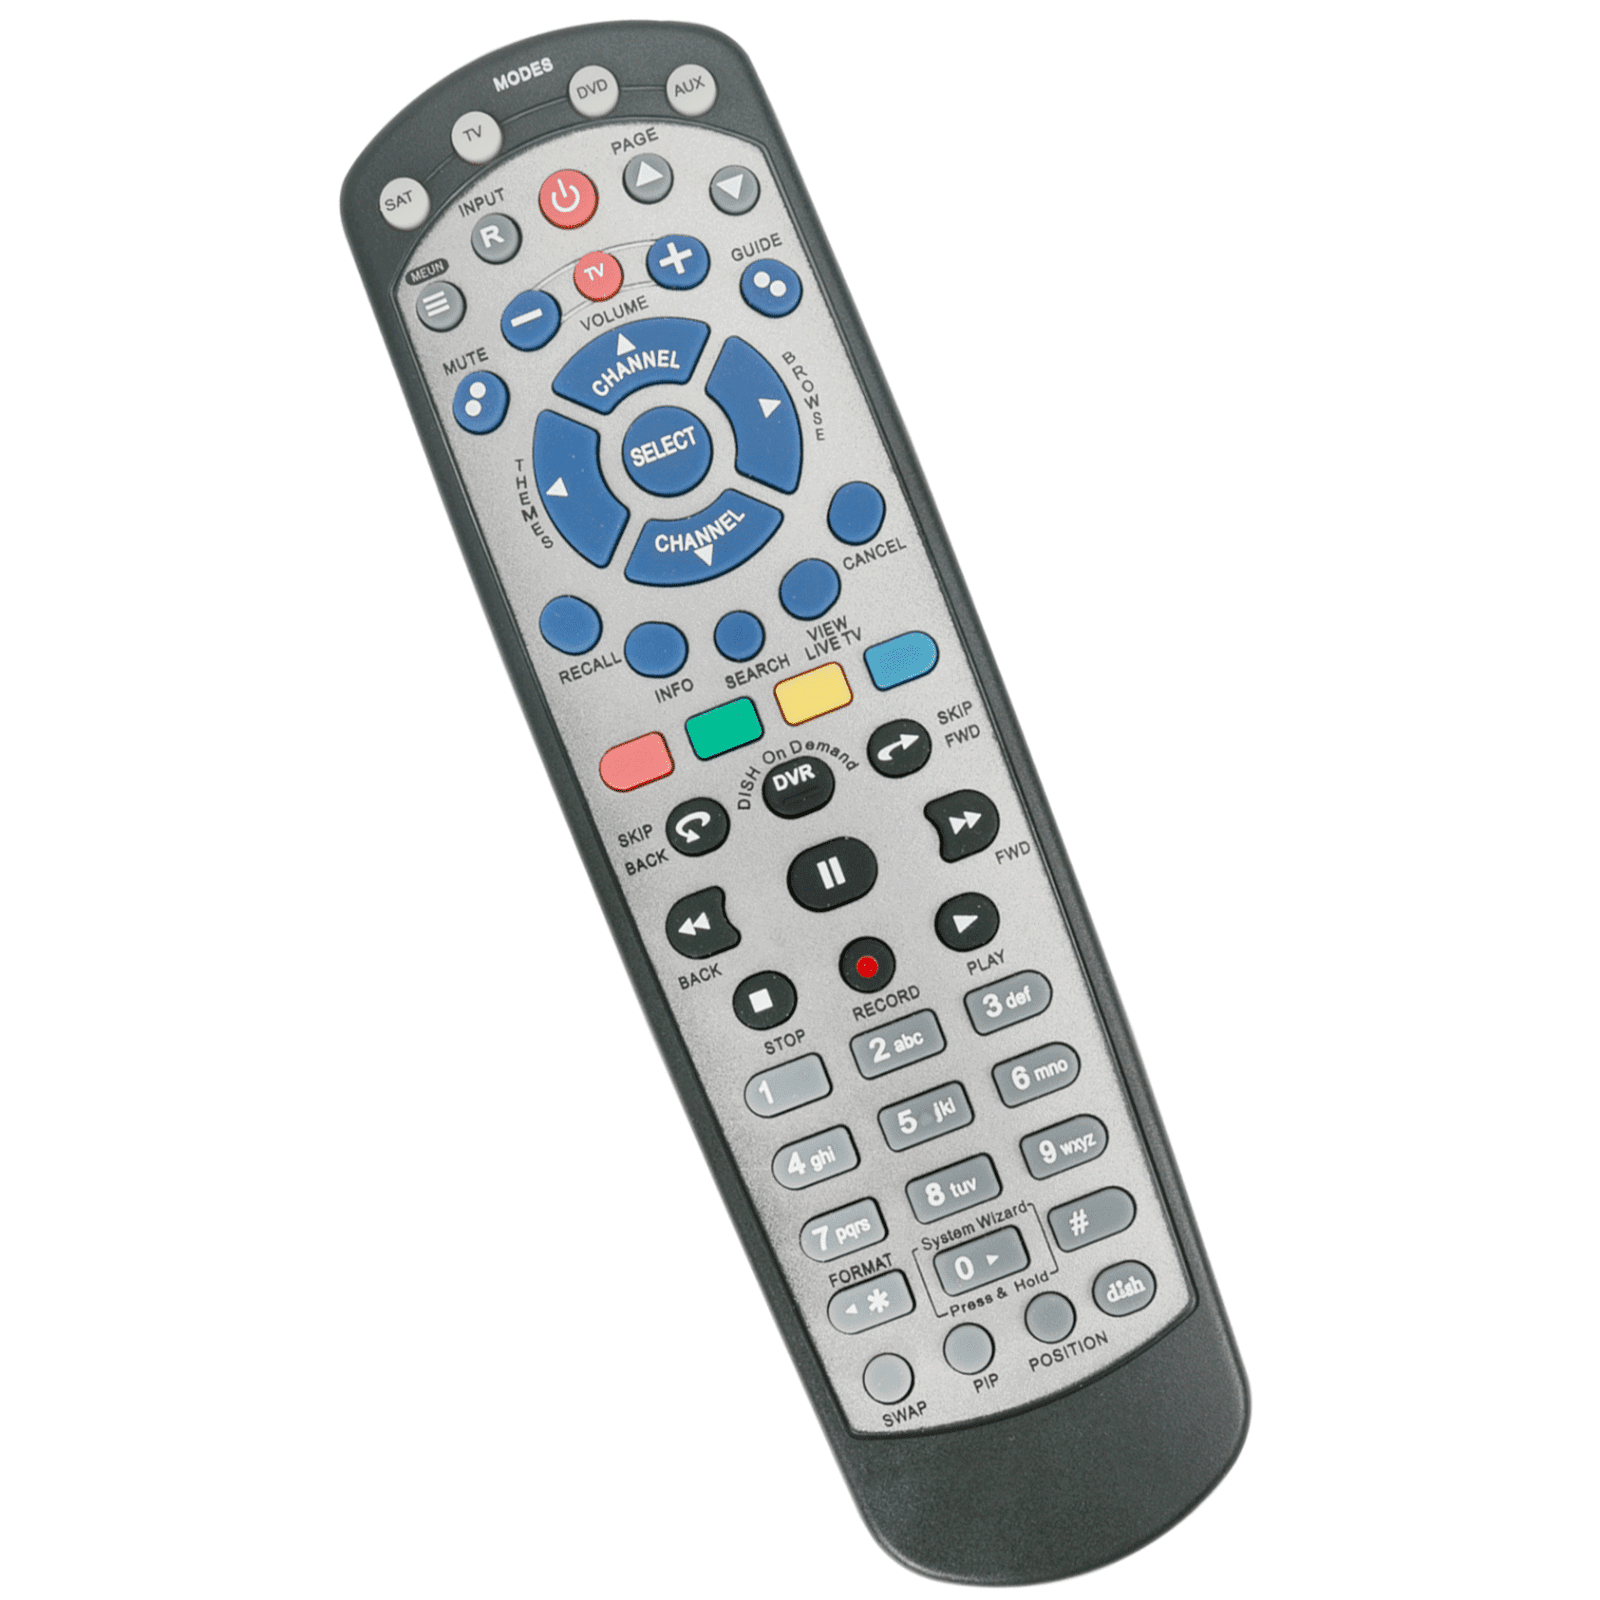 UHF PRO Remote Control TV1 or TV2 RECEIVER Dish Network 21.1 IR 